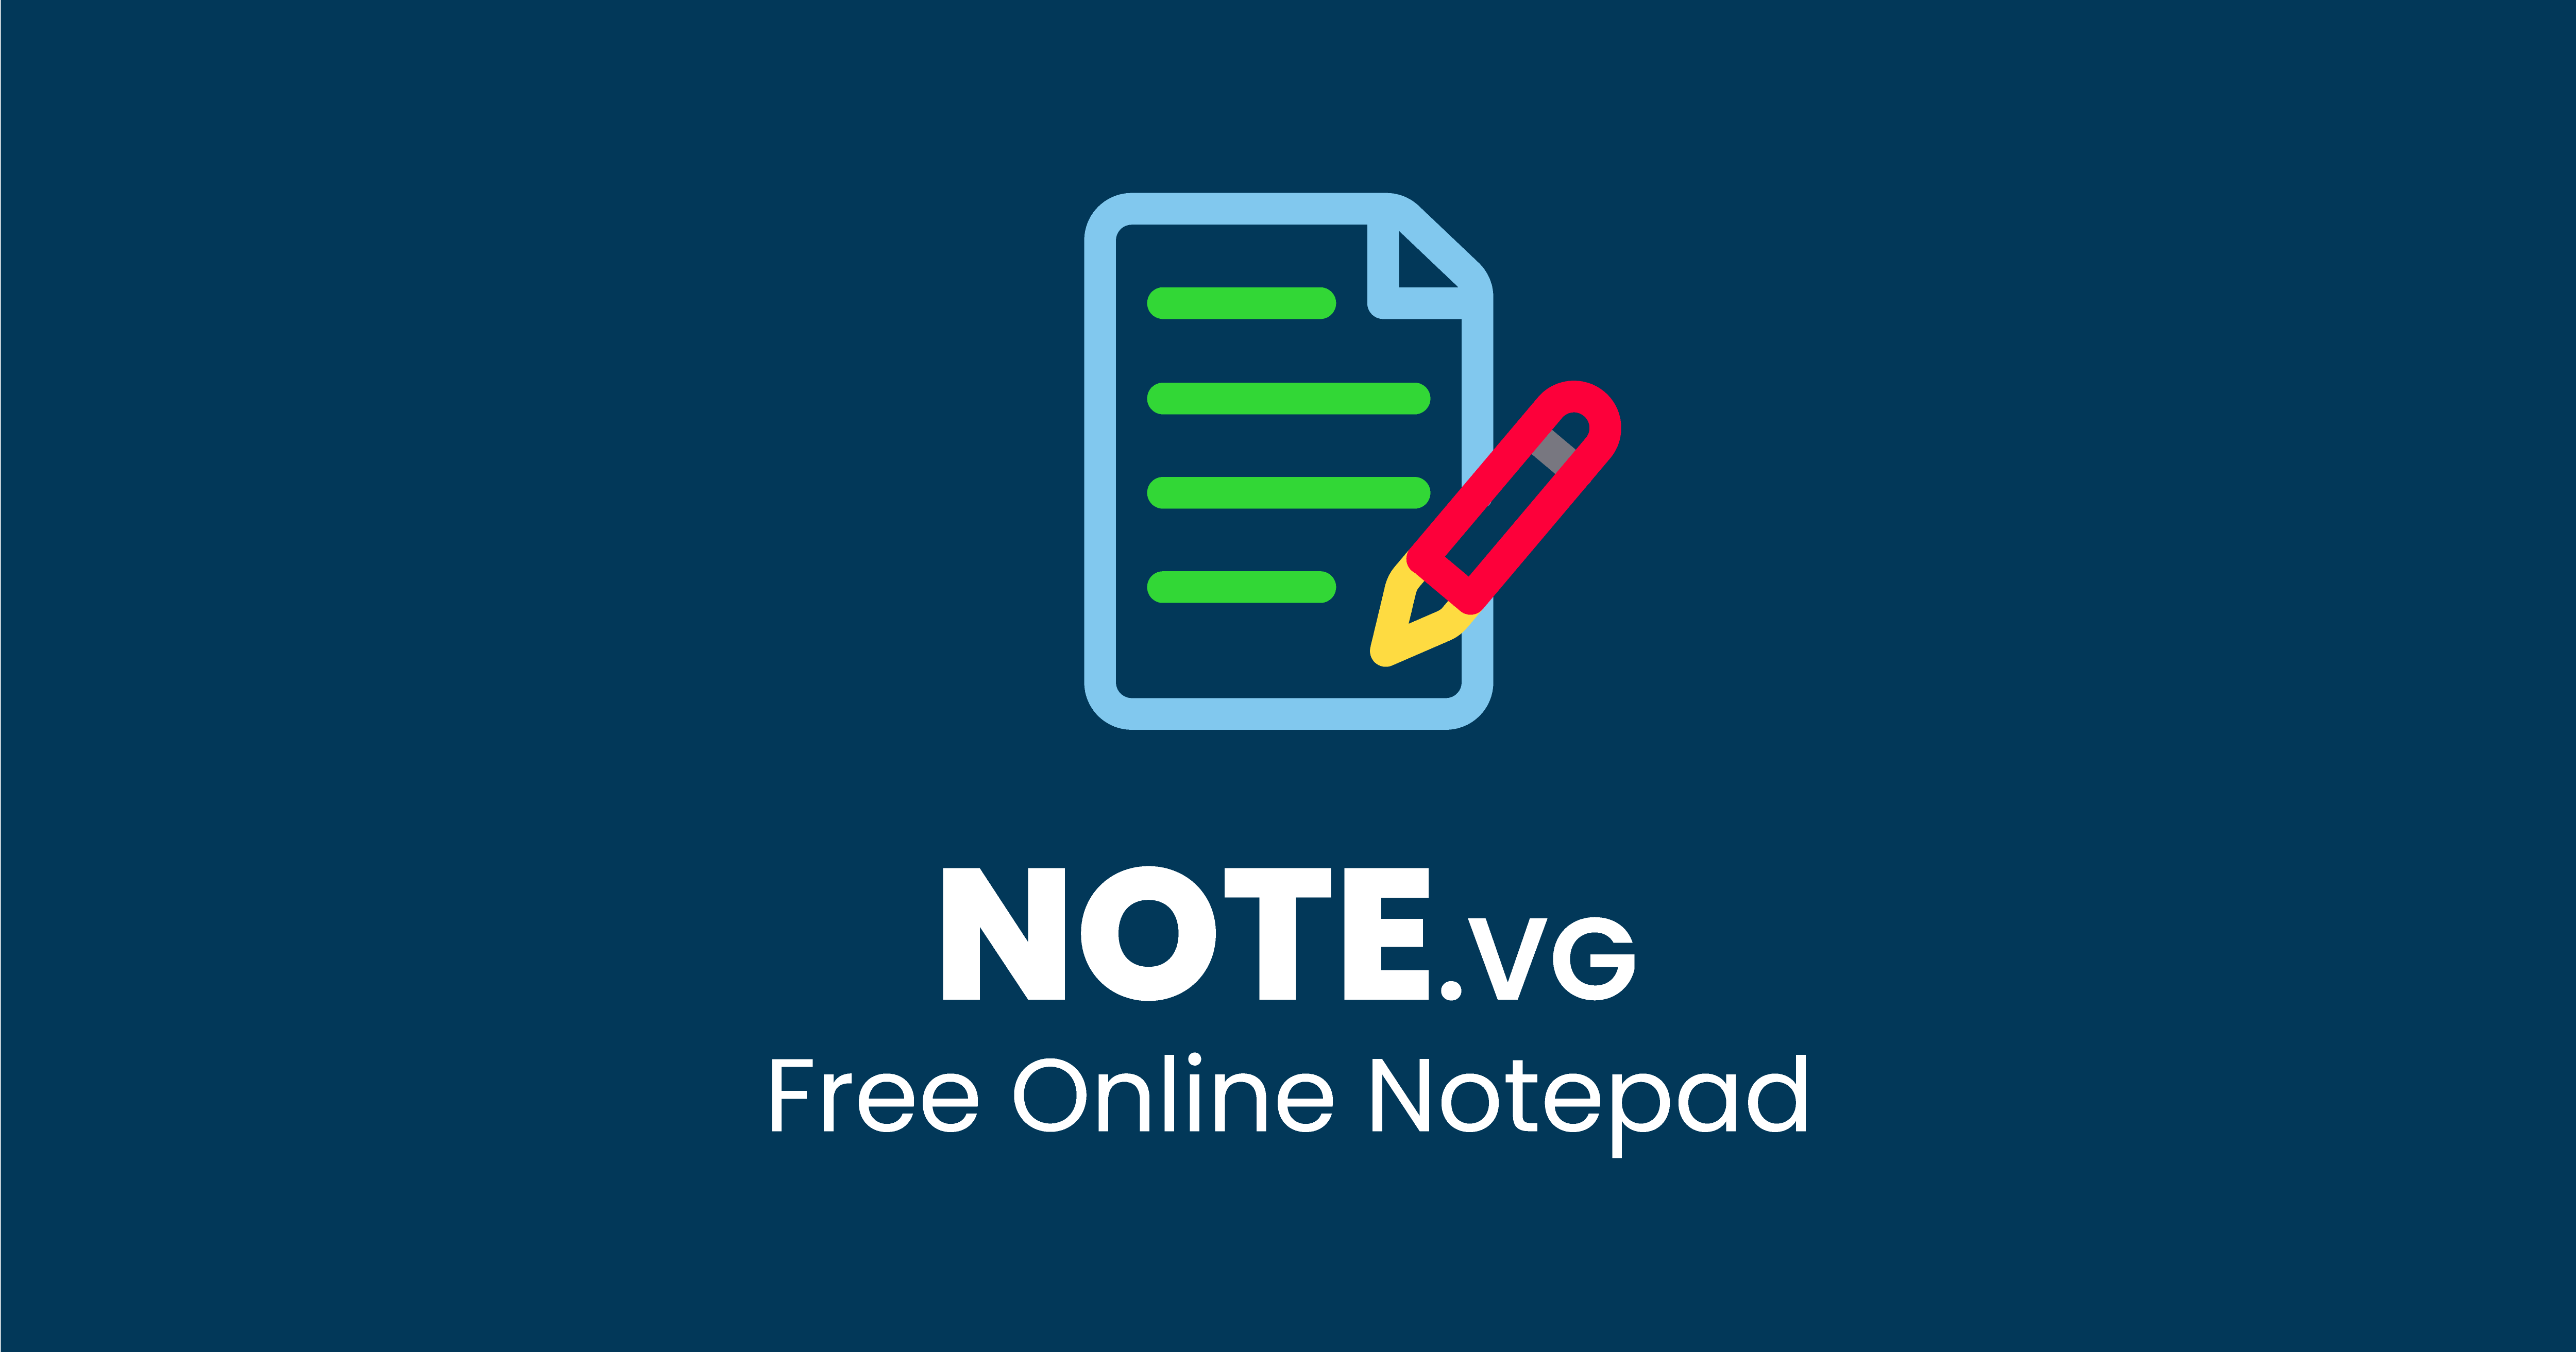 mclarc - NOTE.vg - Free Online Notepad